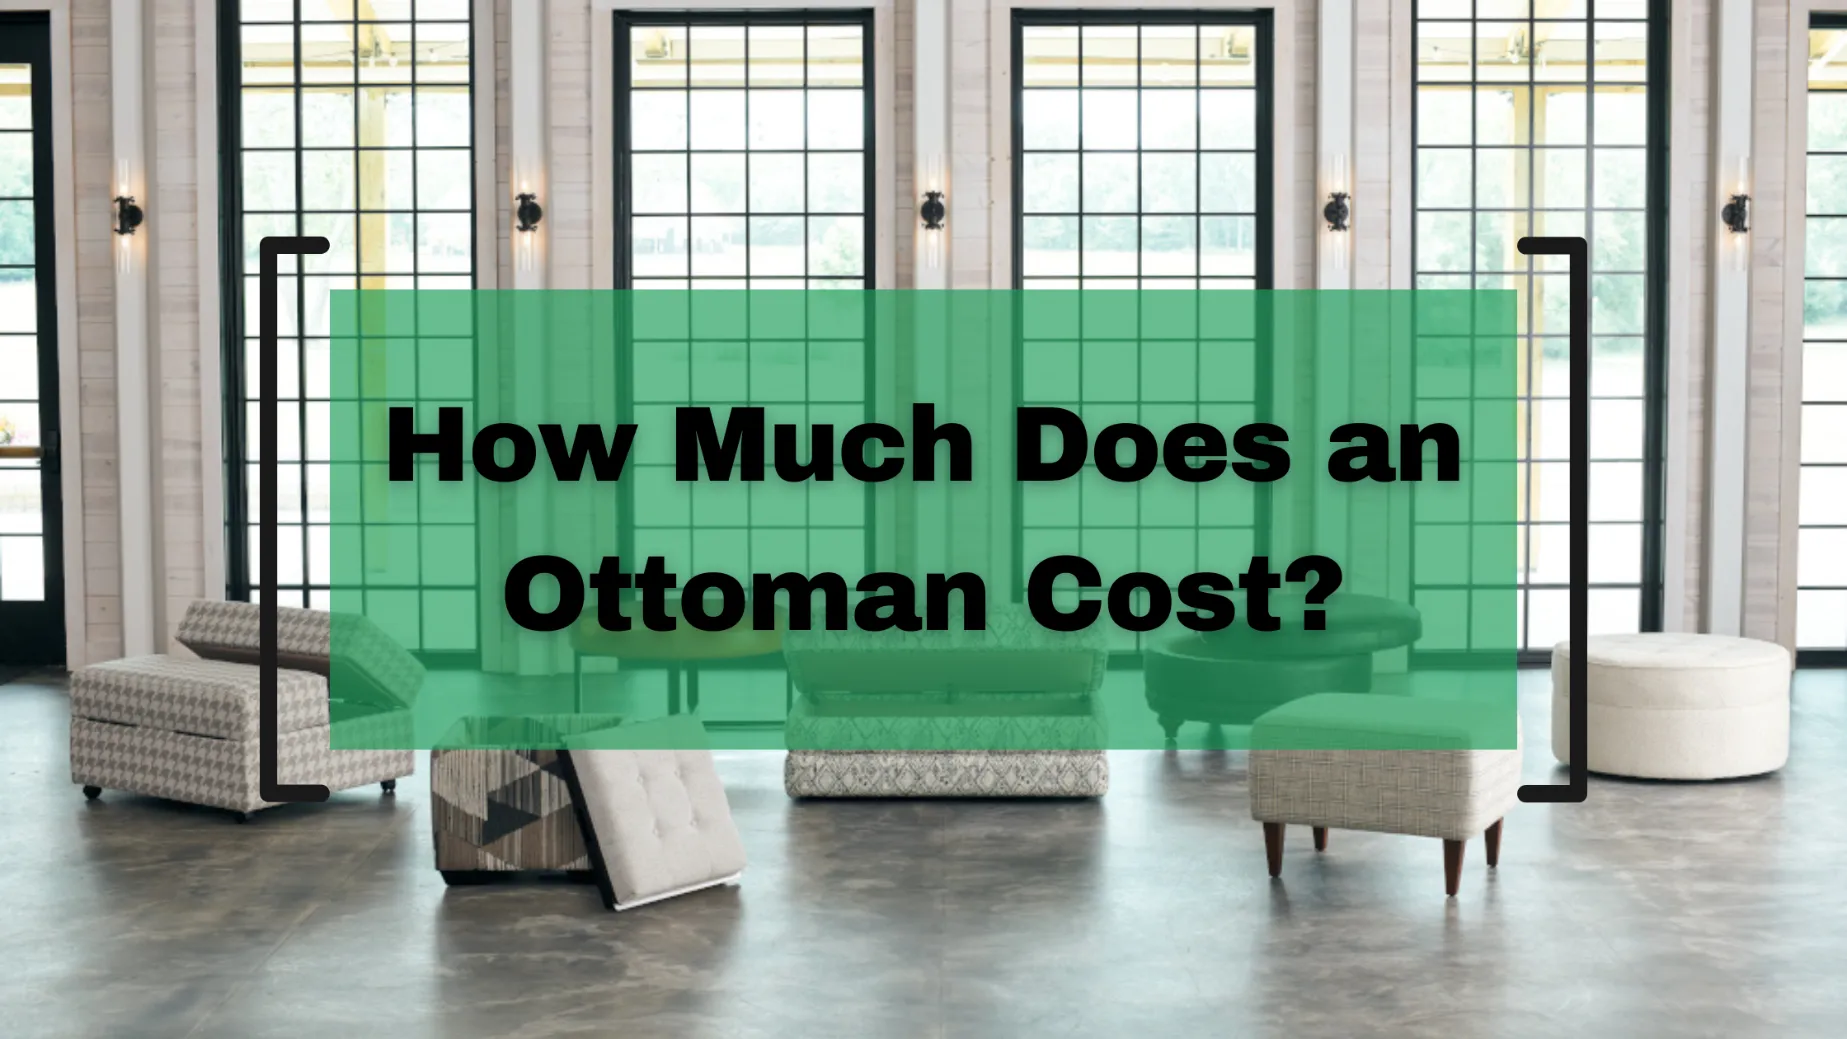 How Much Does an Ottoman Cost?